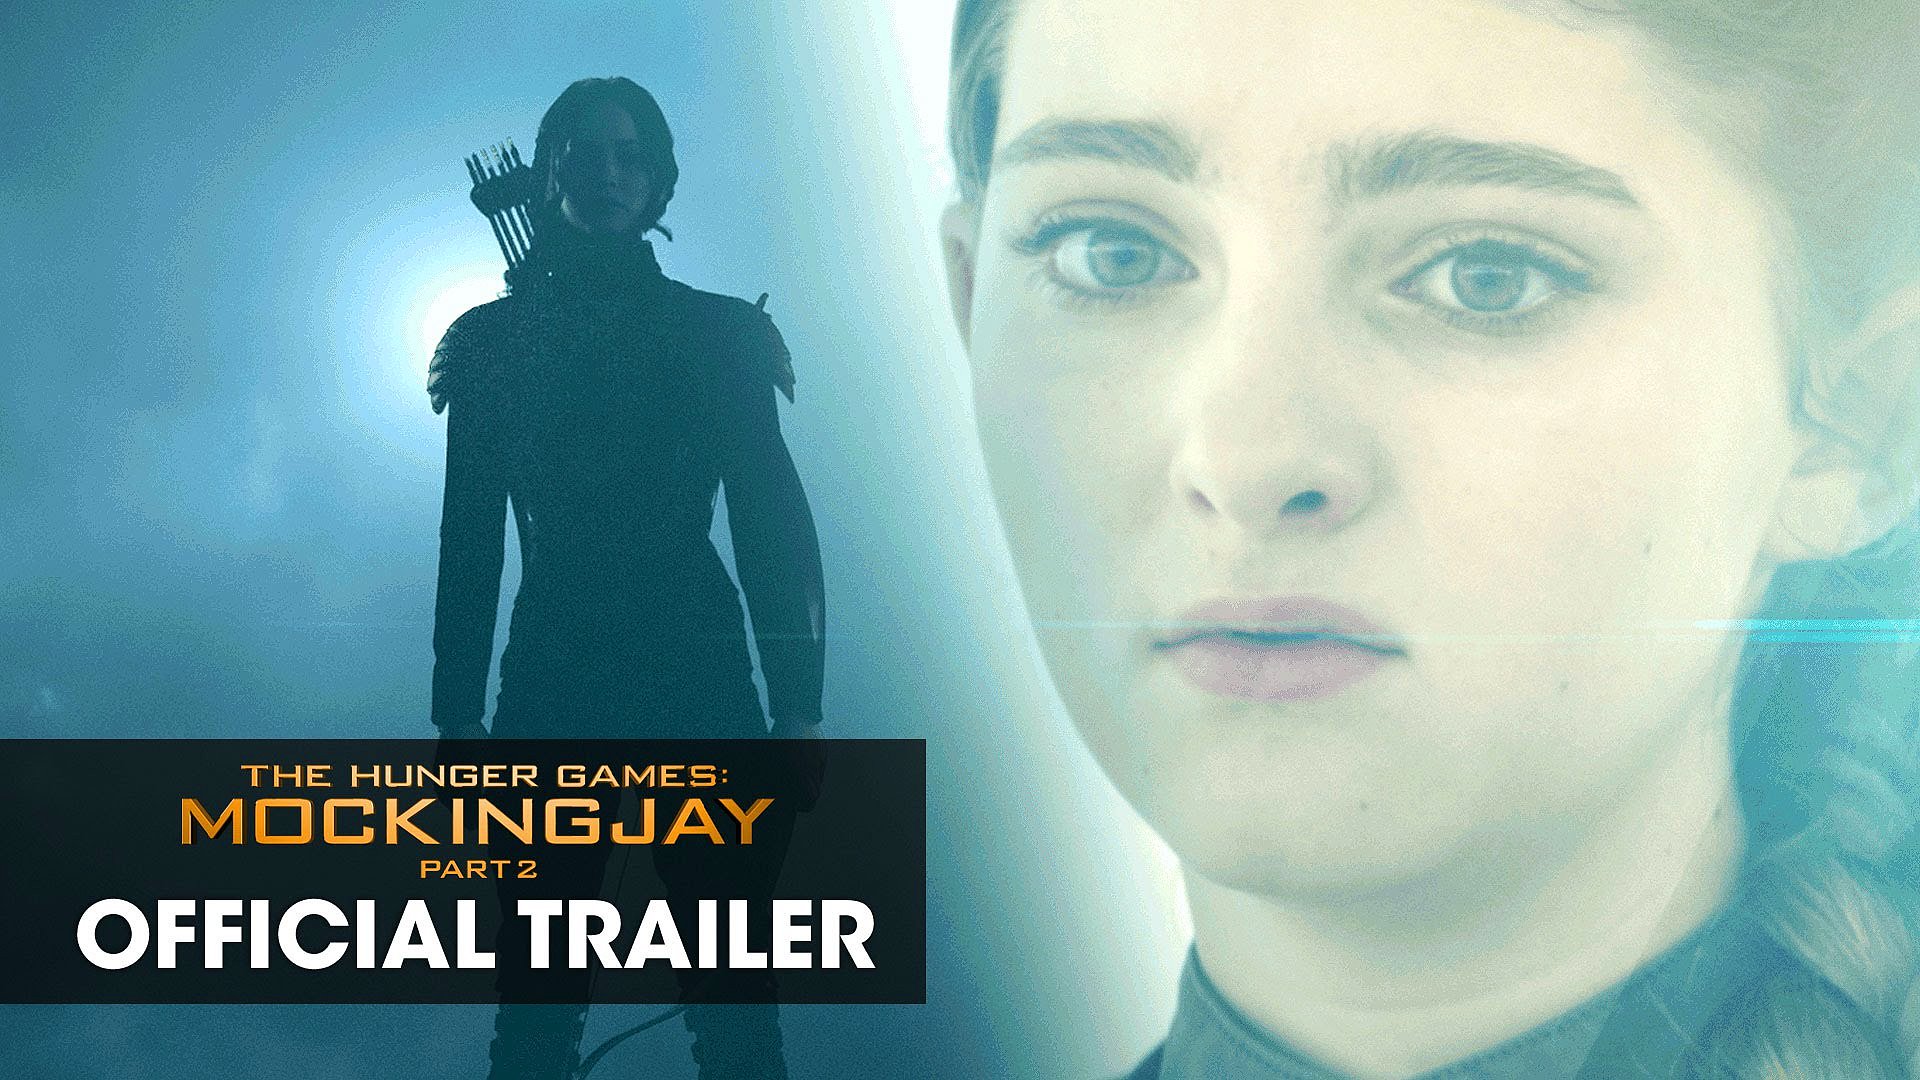 the hunger games official trailer part 2